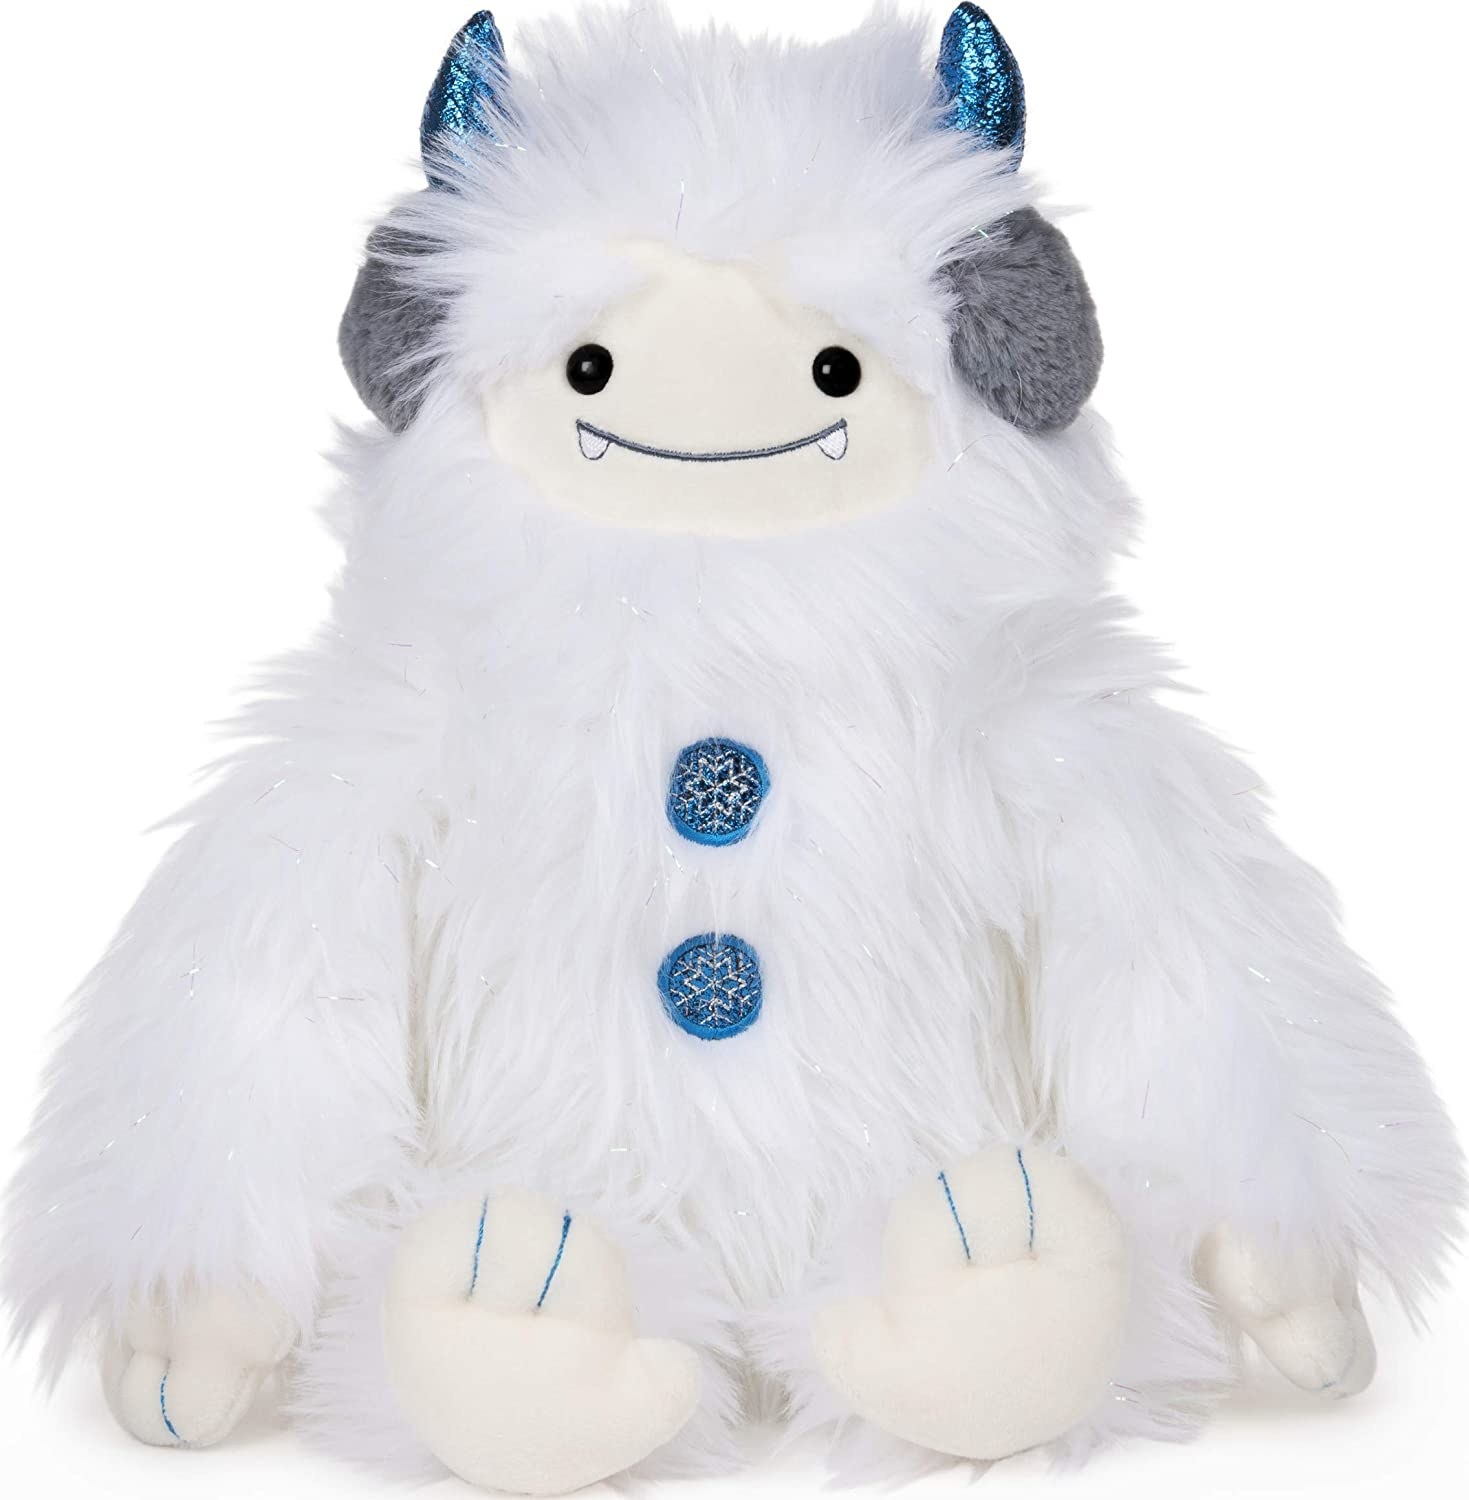 A furry white stuffed yeti doll with blue horns and buttons